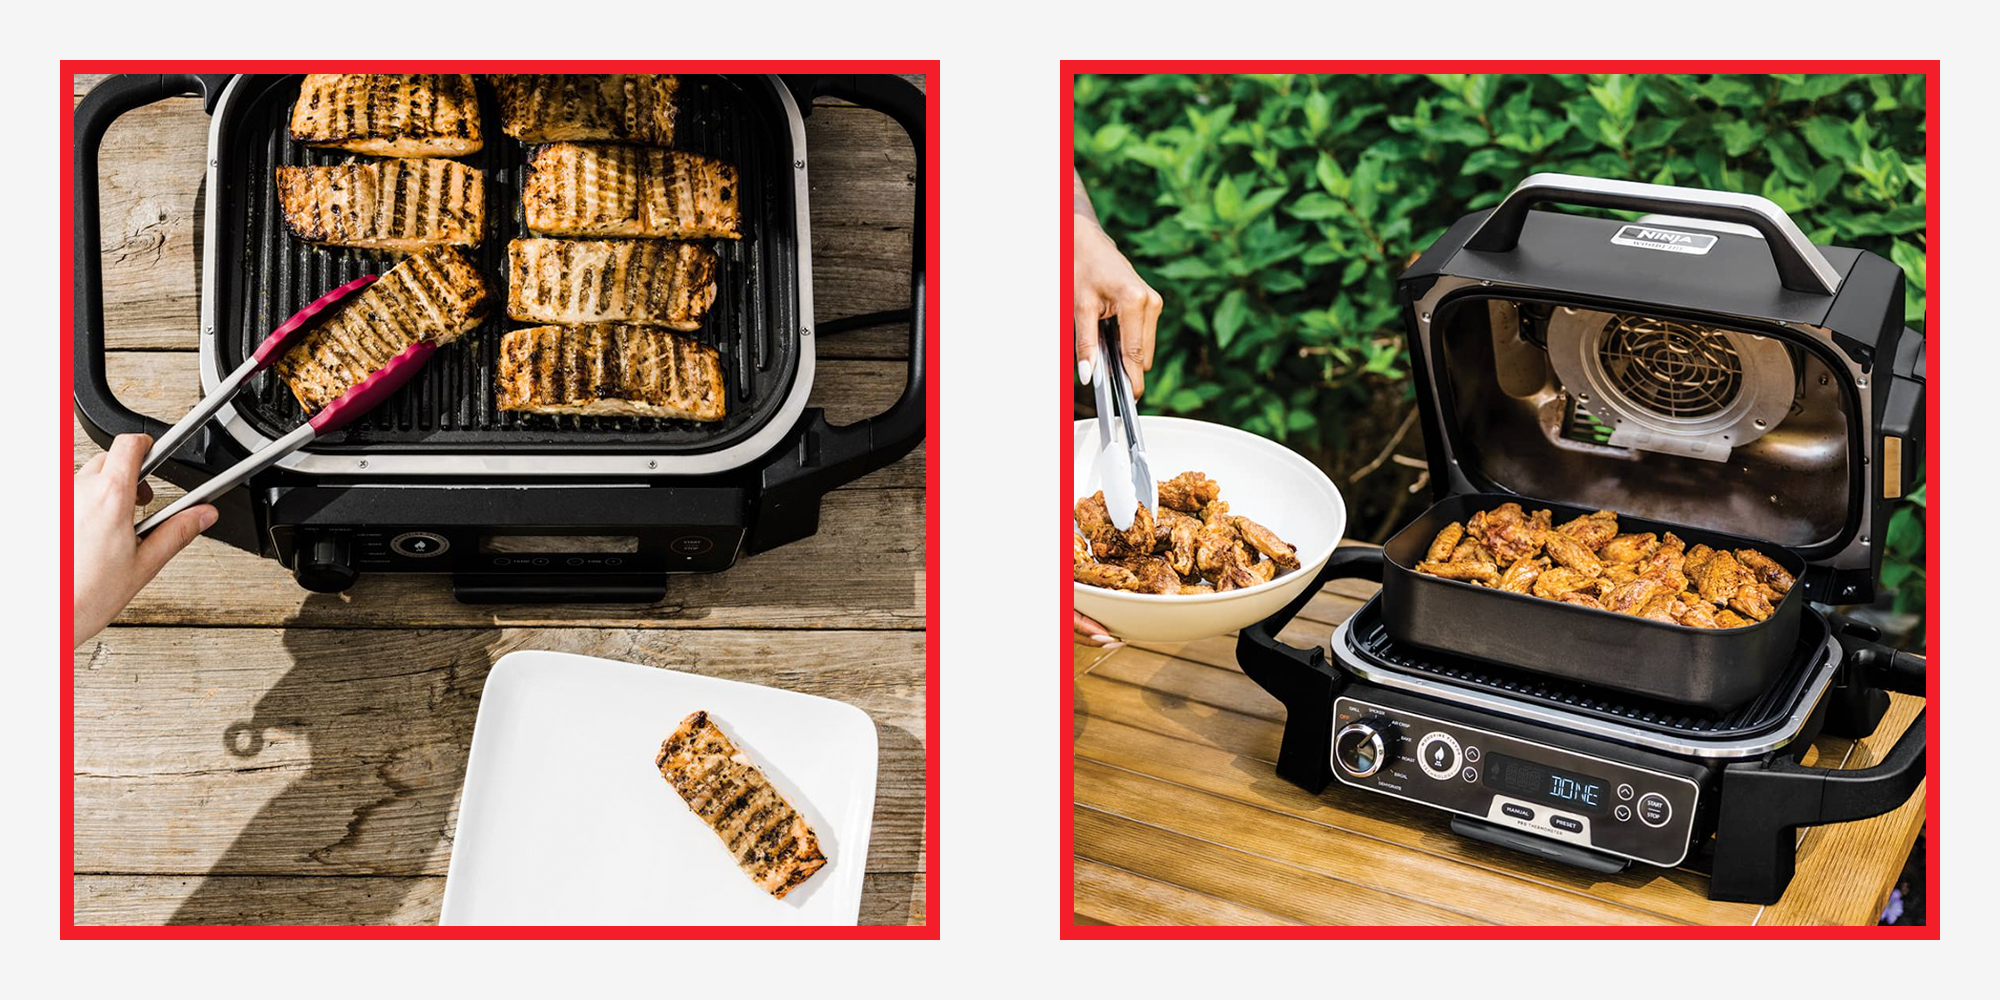 Ninja Woodfire Electric Grill review: you can do it all